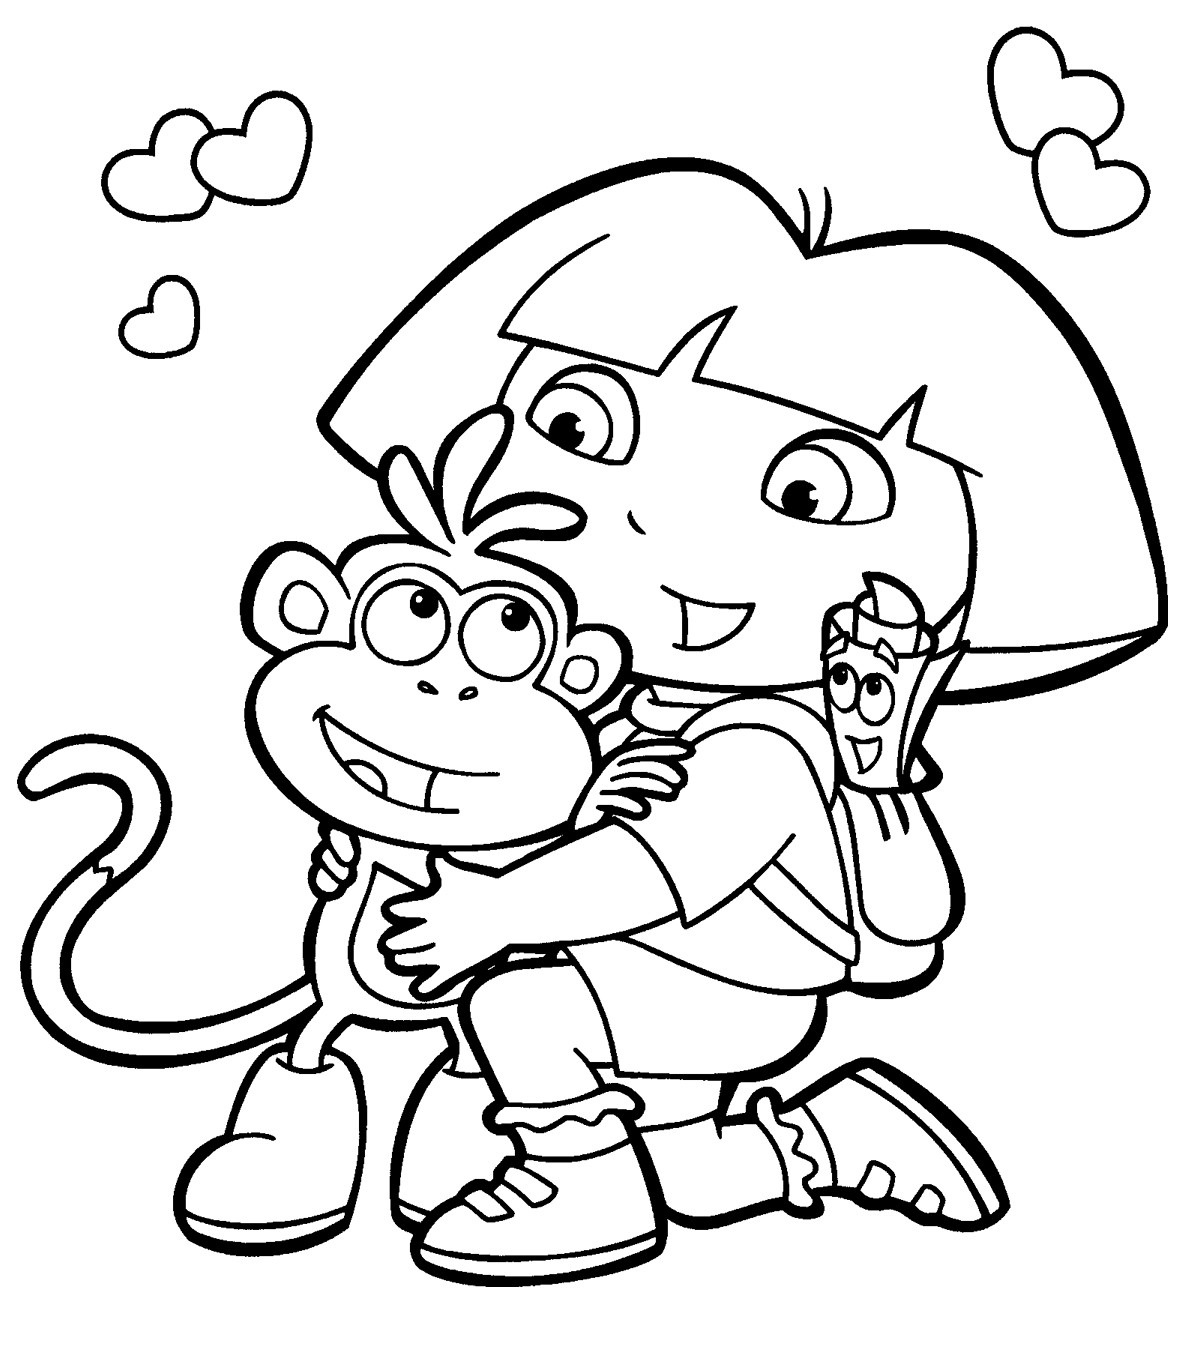 Dora Coloring Pages Printable
 Free Printable Dora The Explorer Coloring Pages For Kids